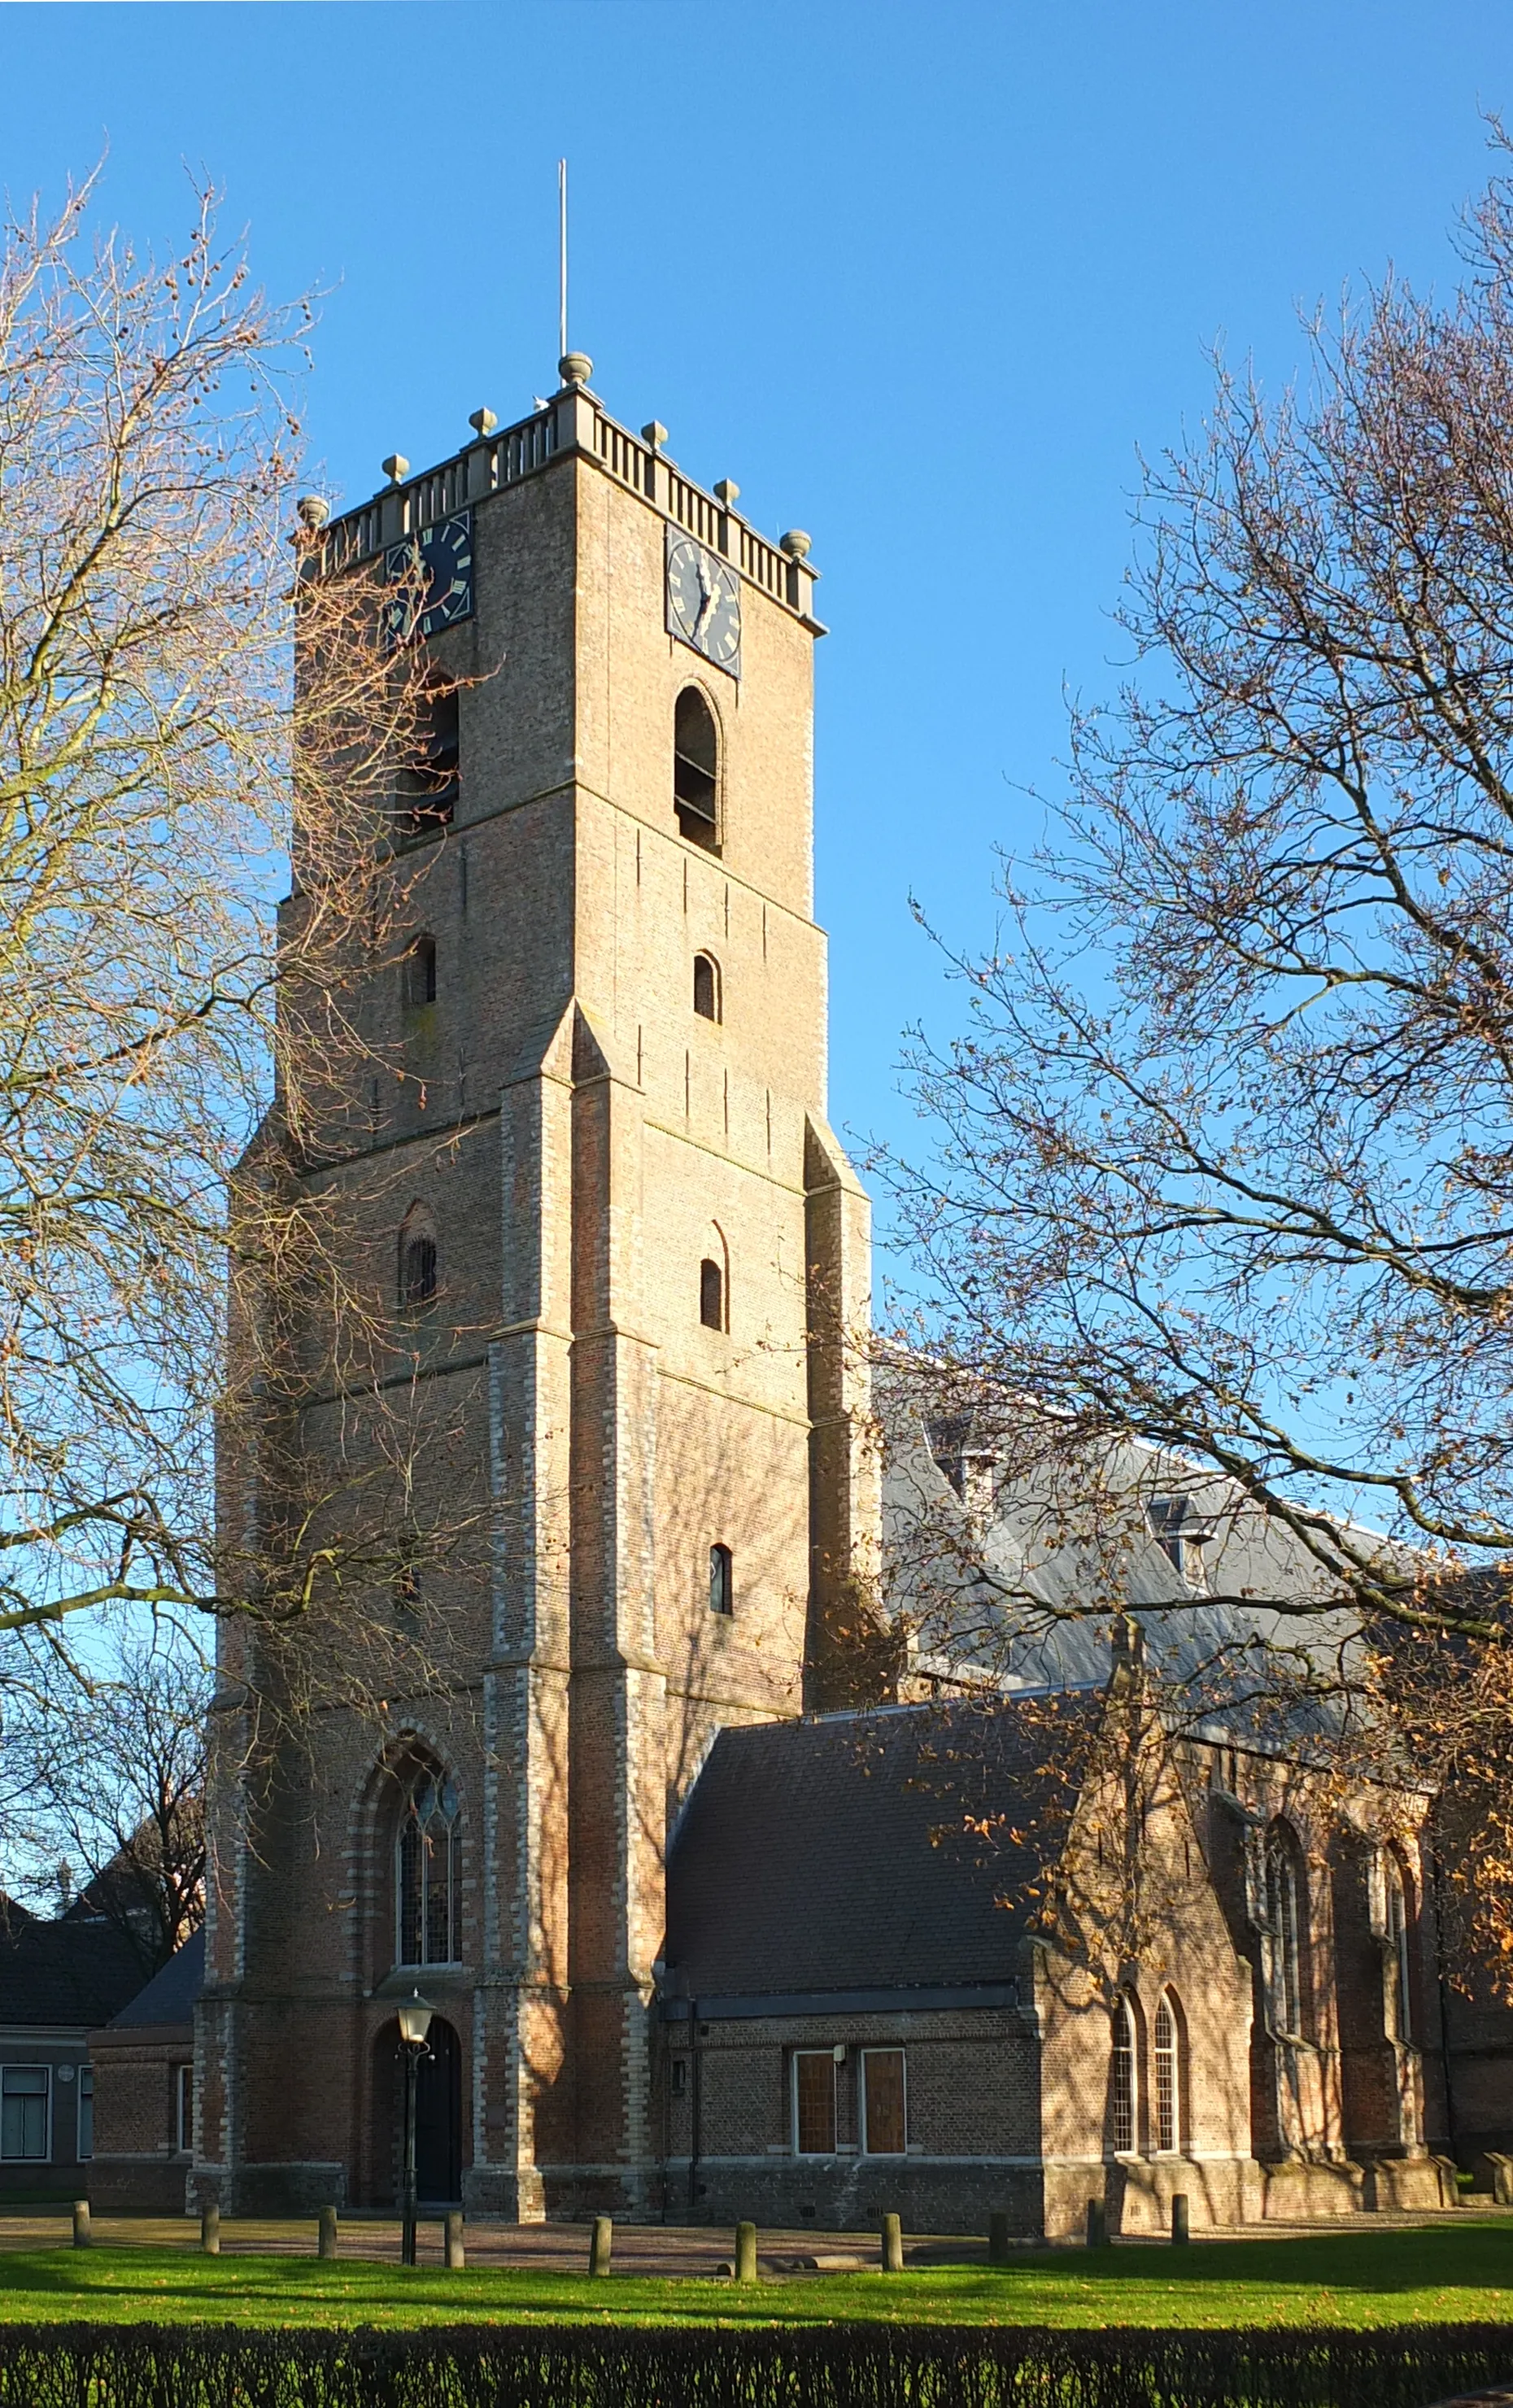 Photo showing: The Dutch Reformed Church at Middelharnis, a late-gothic church. The tower was built after the model of Antwerp's St Michael's Convent, because this convent had paid for the dikes surrounding Middelharnis. The spire was demolished in 1811. The church burnt down in 1904 and 1948, both times it was rebuilt to the old plans.